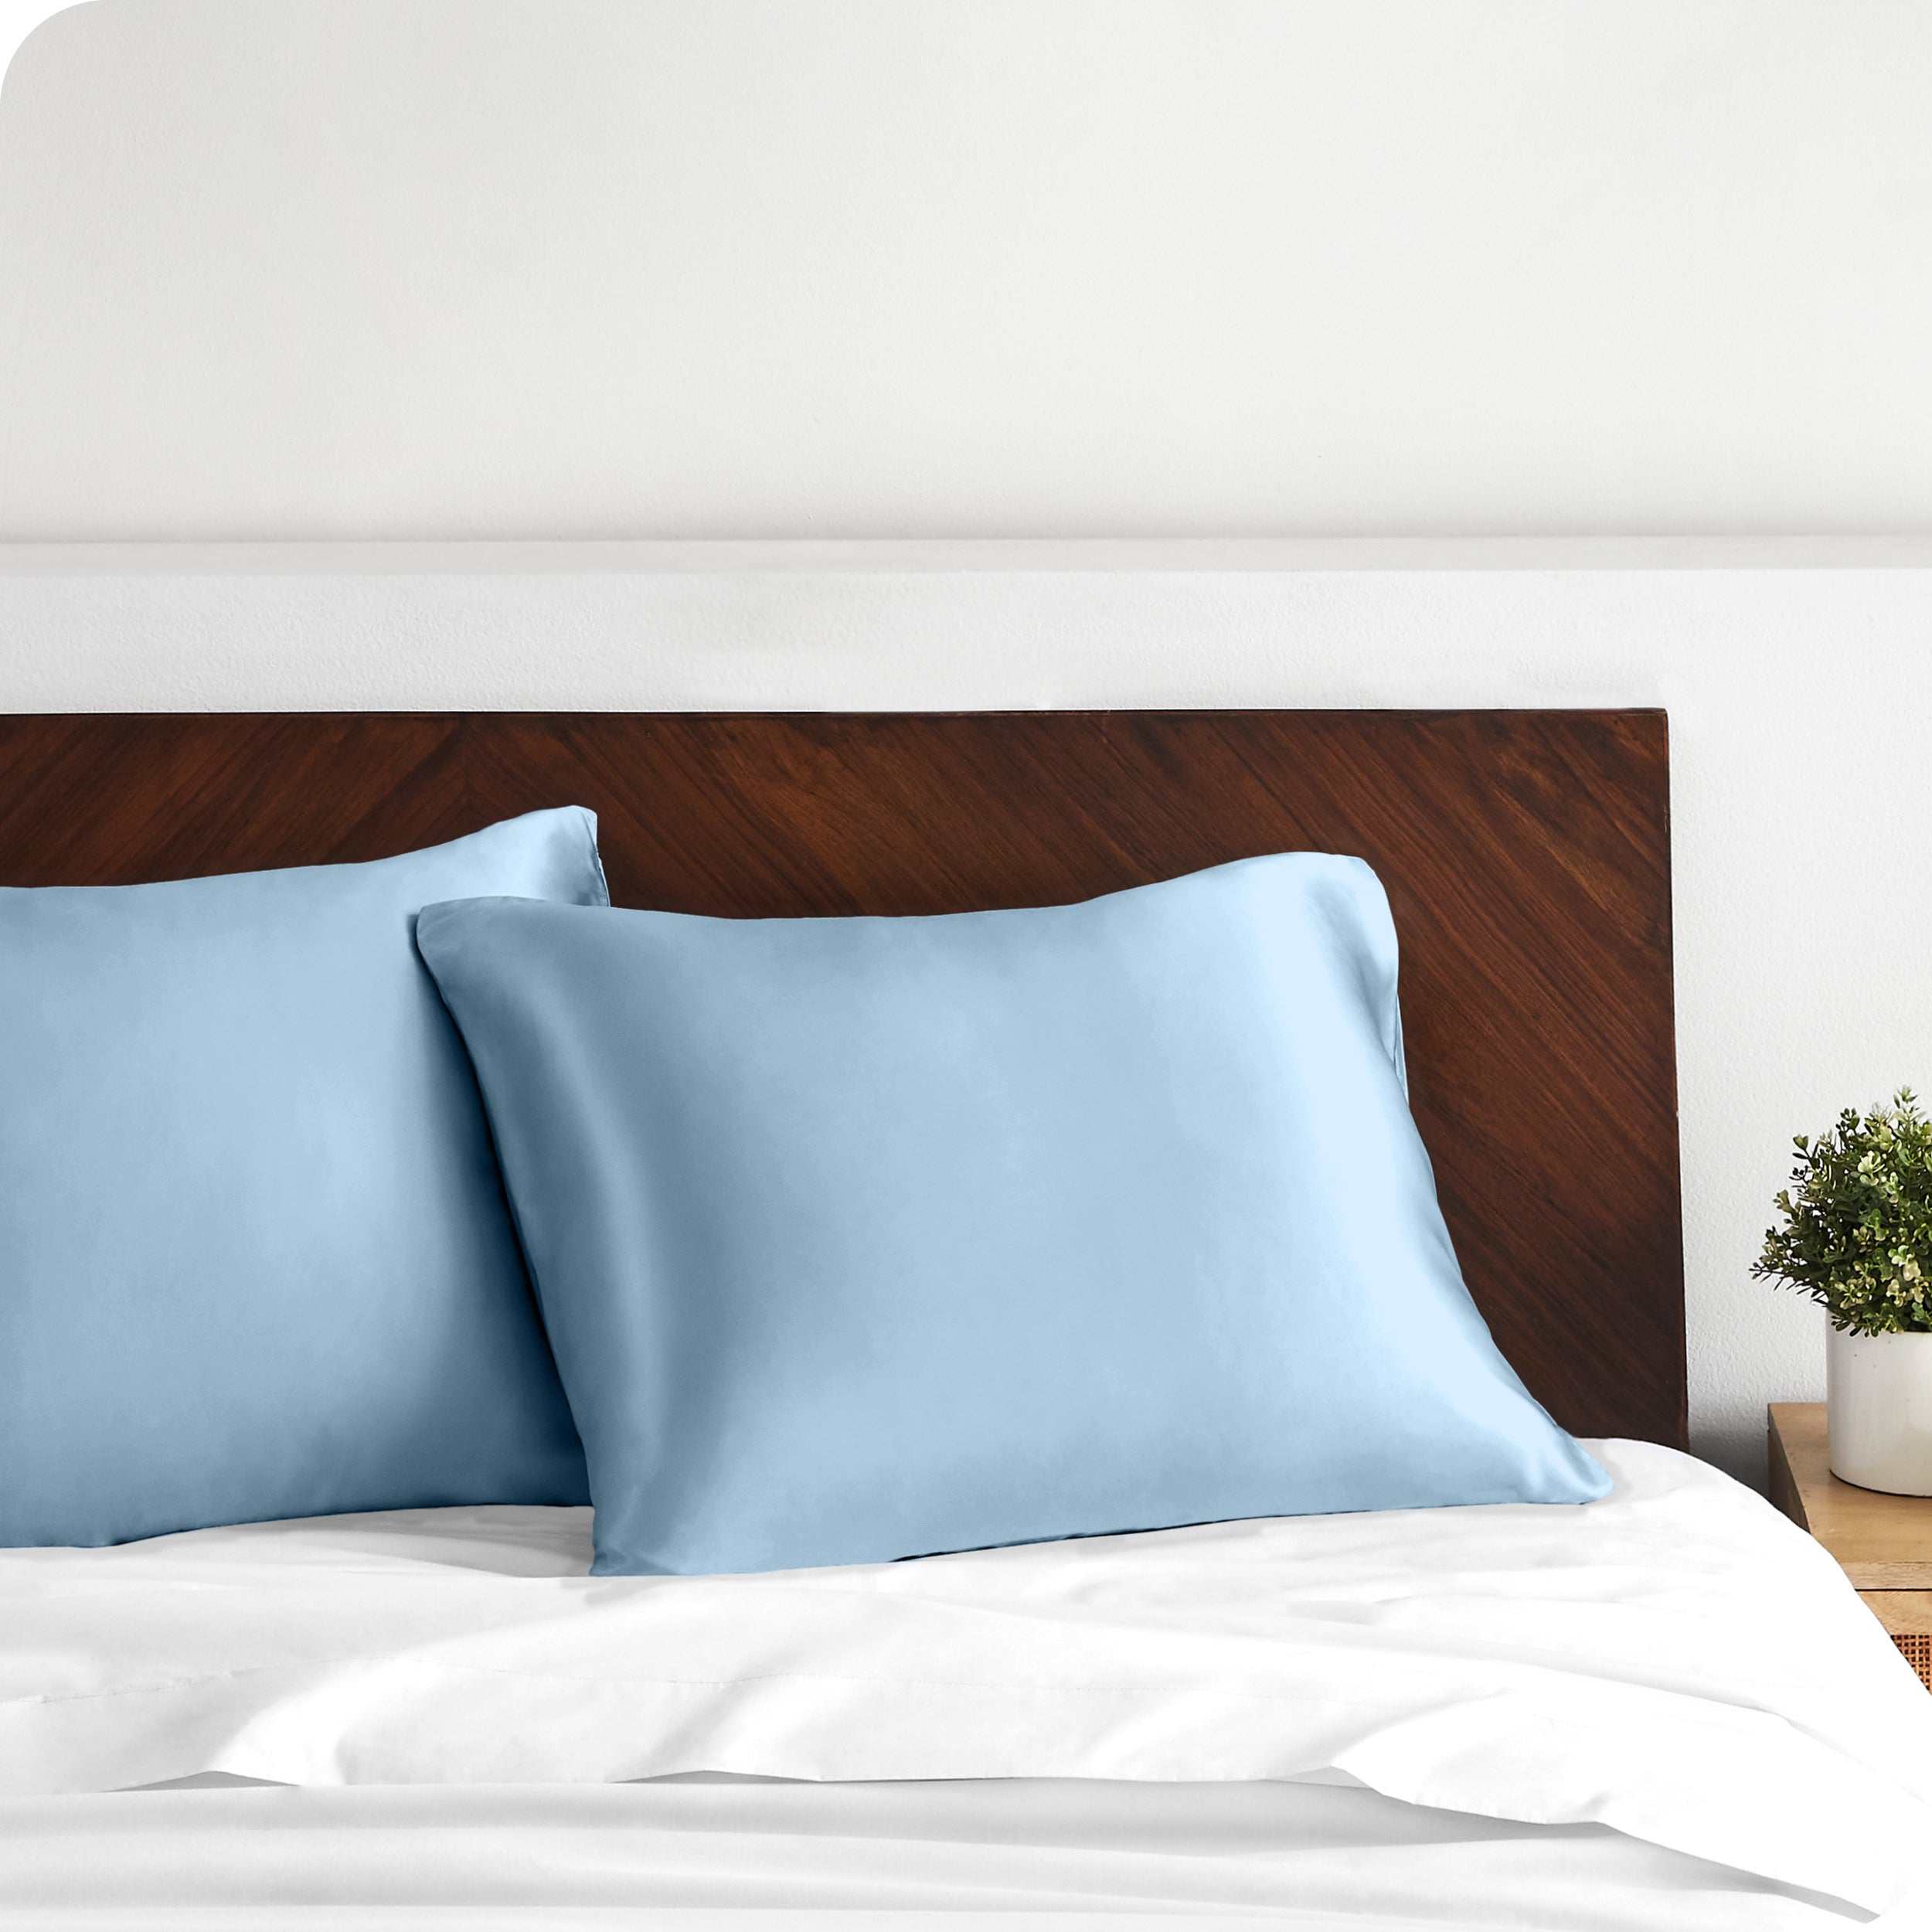 Two satin pillowcases on pillows against a wooden headboard